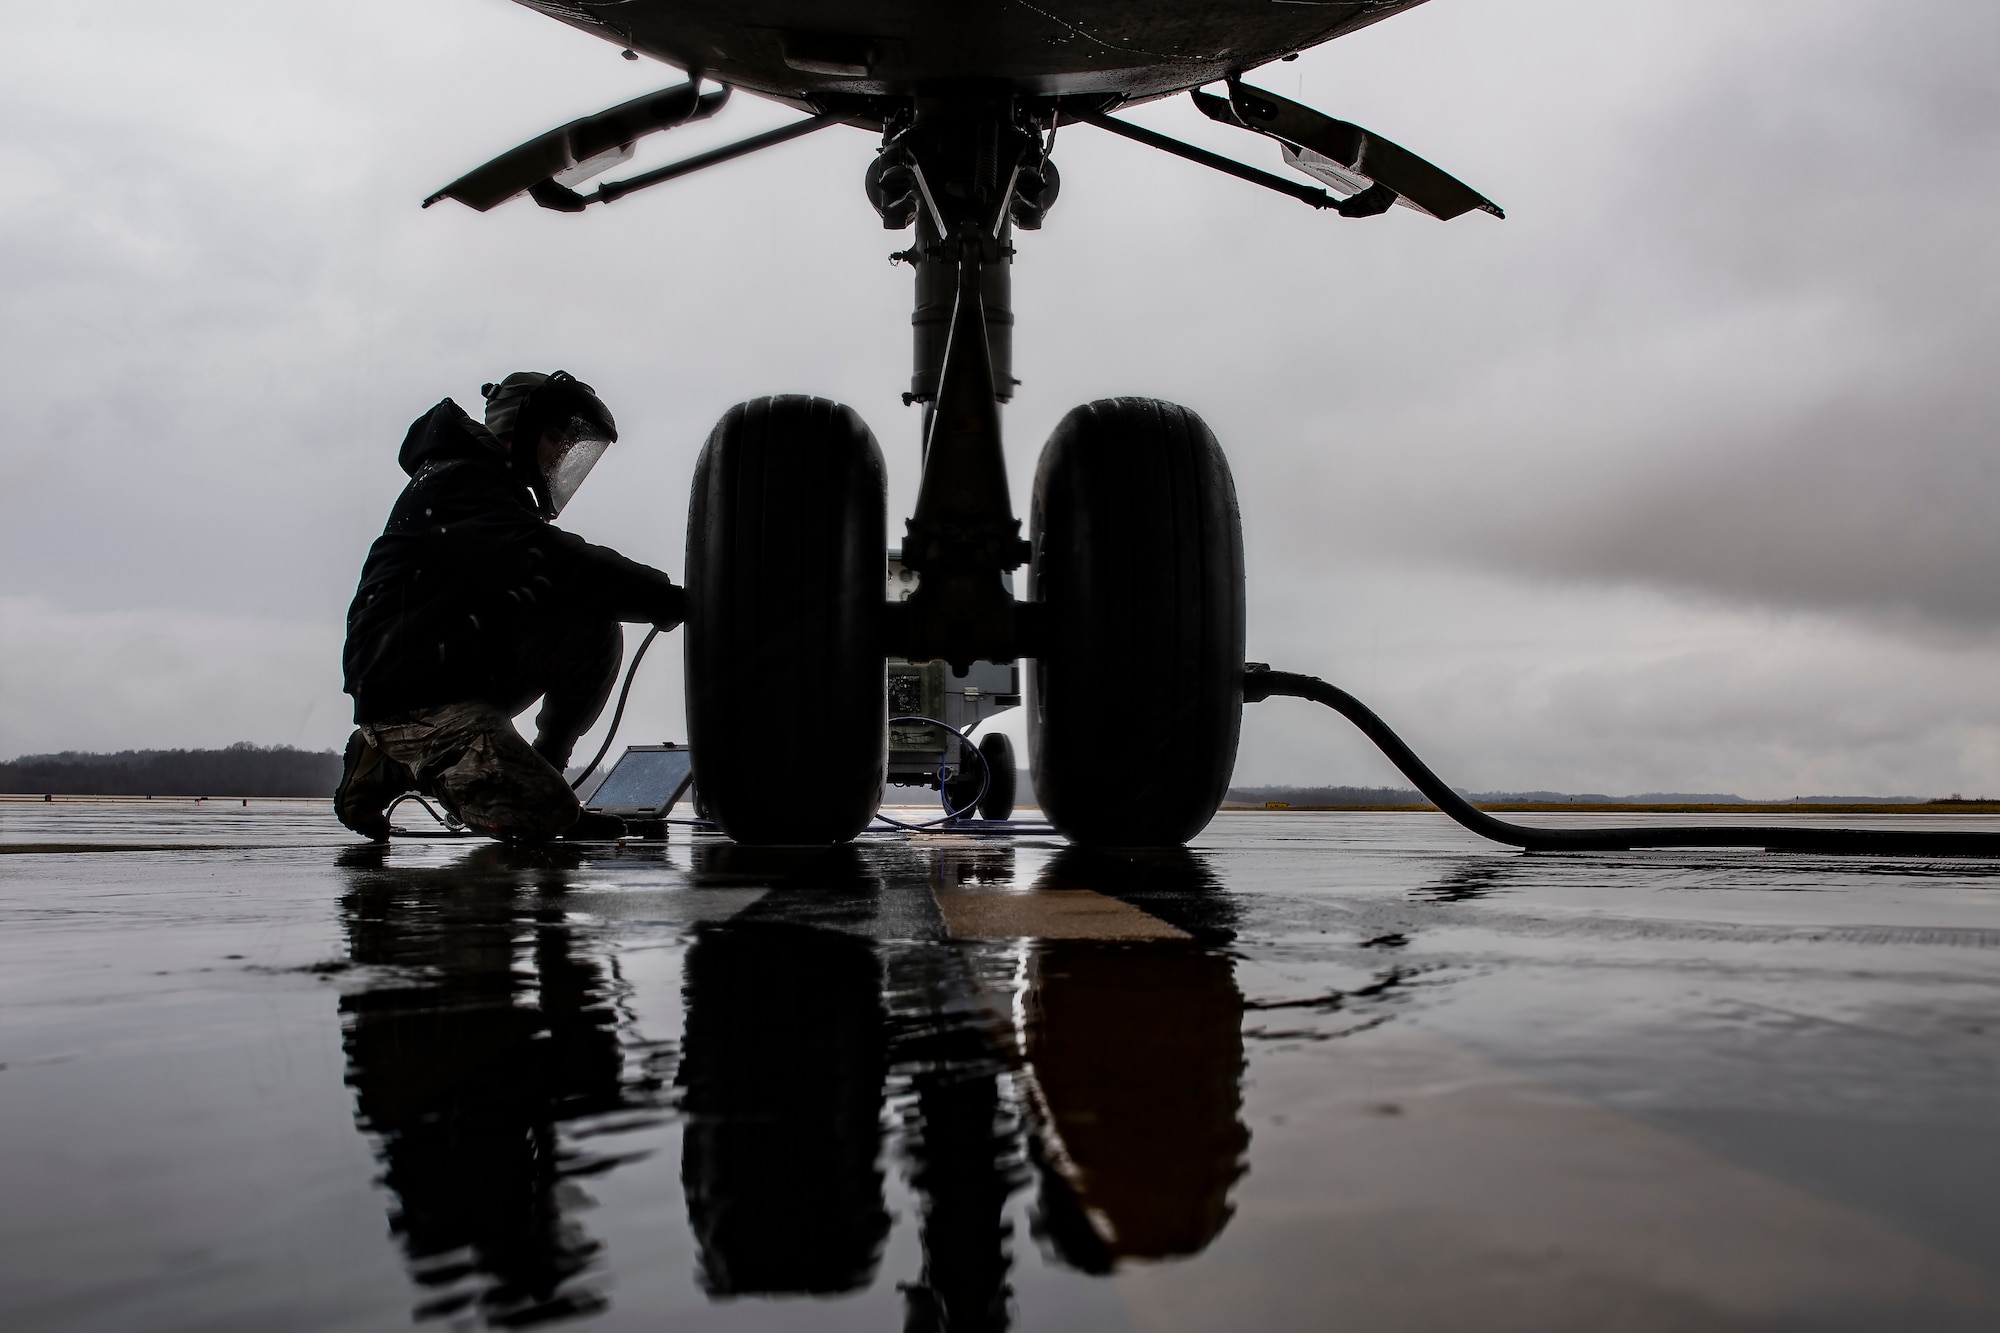 Crew chief services a nose landing-gear tire on a C-17 Globemaster III